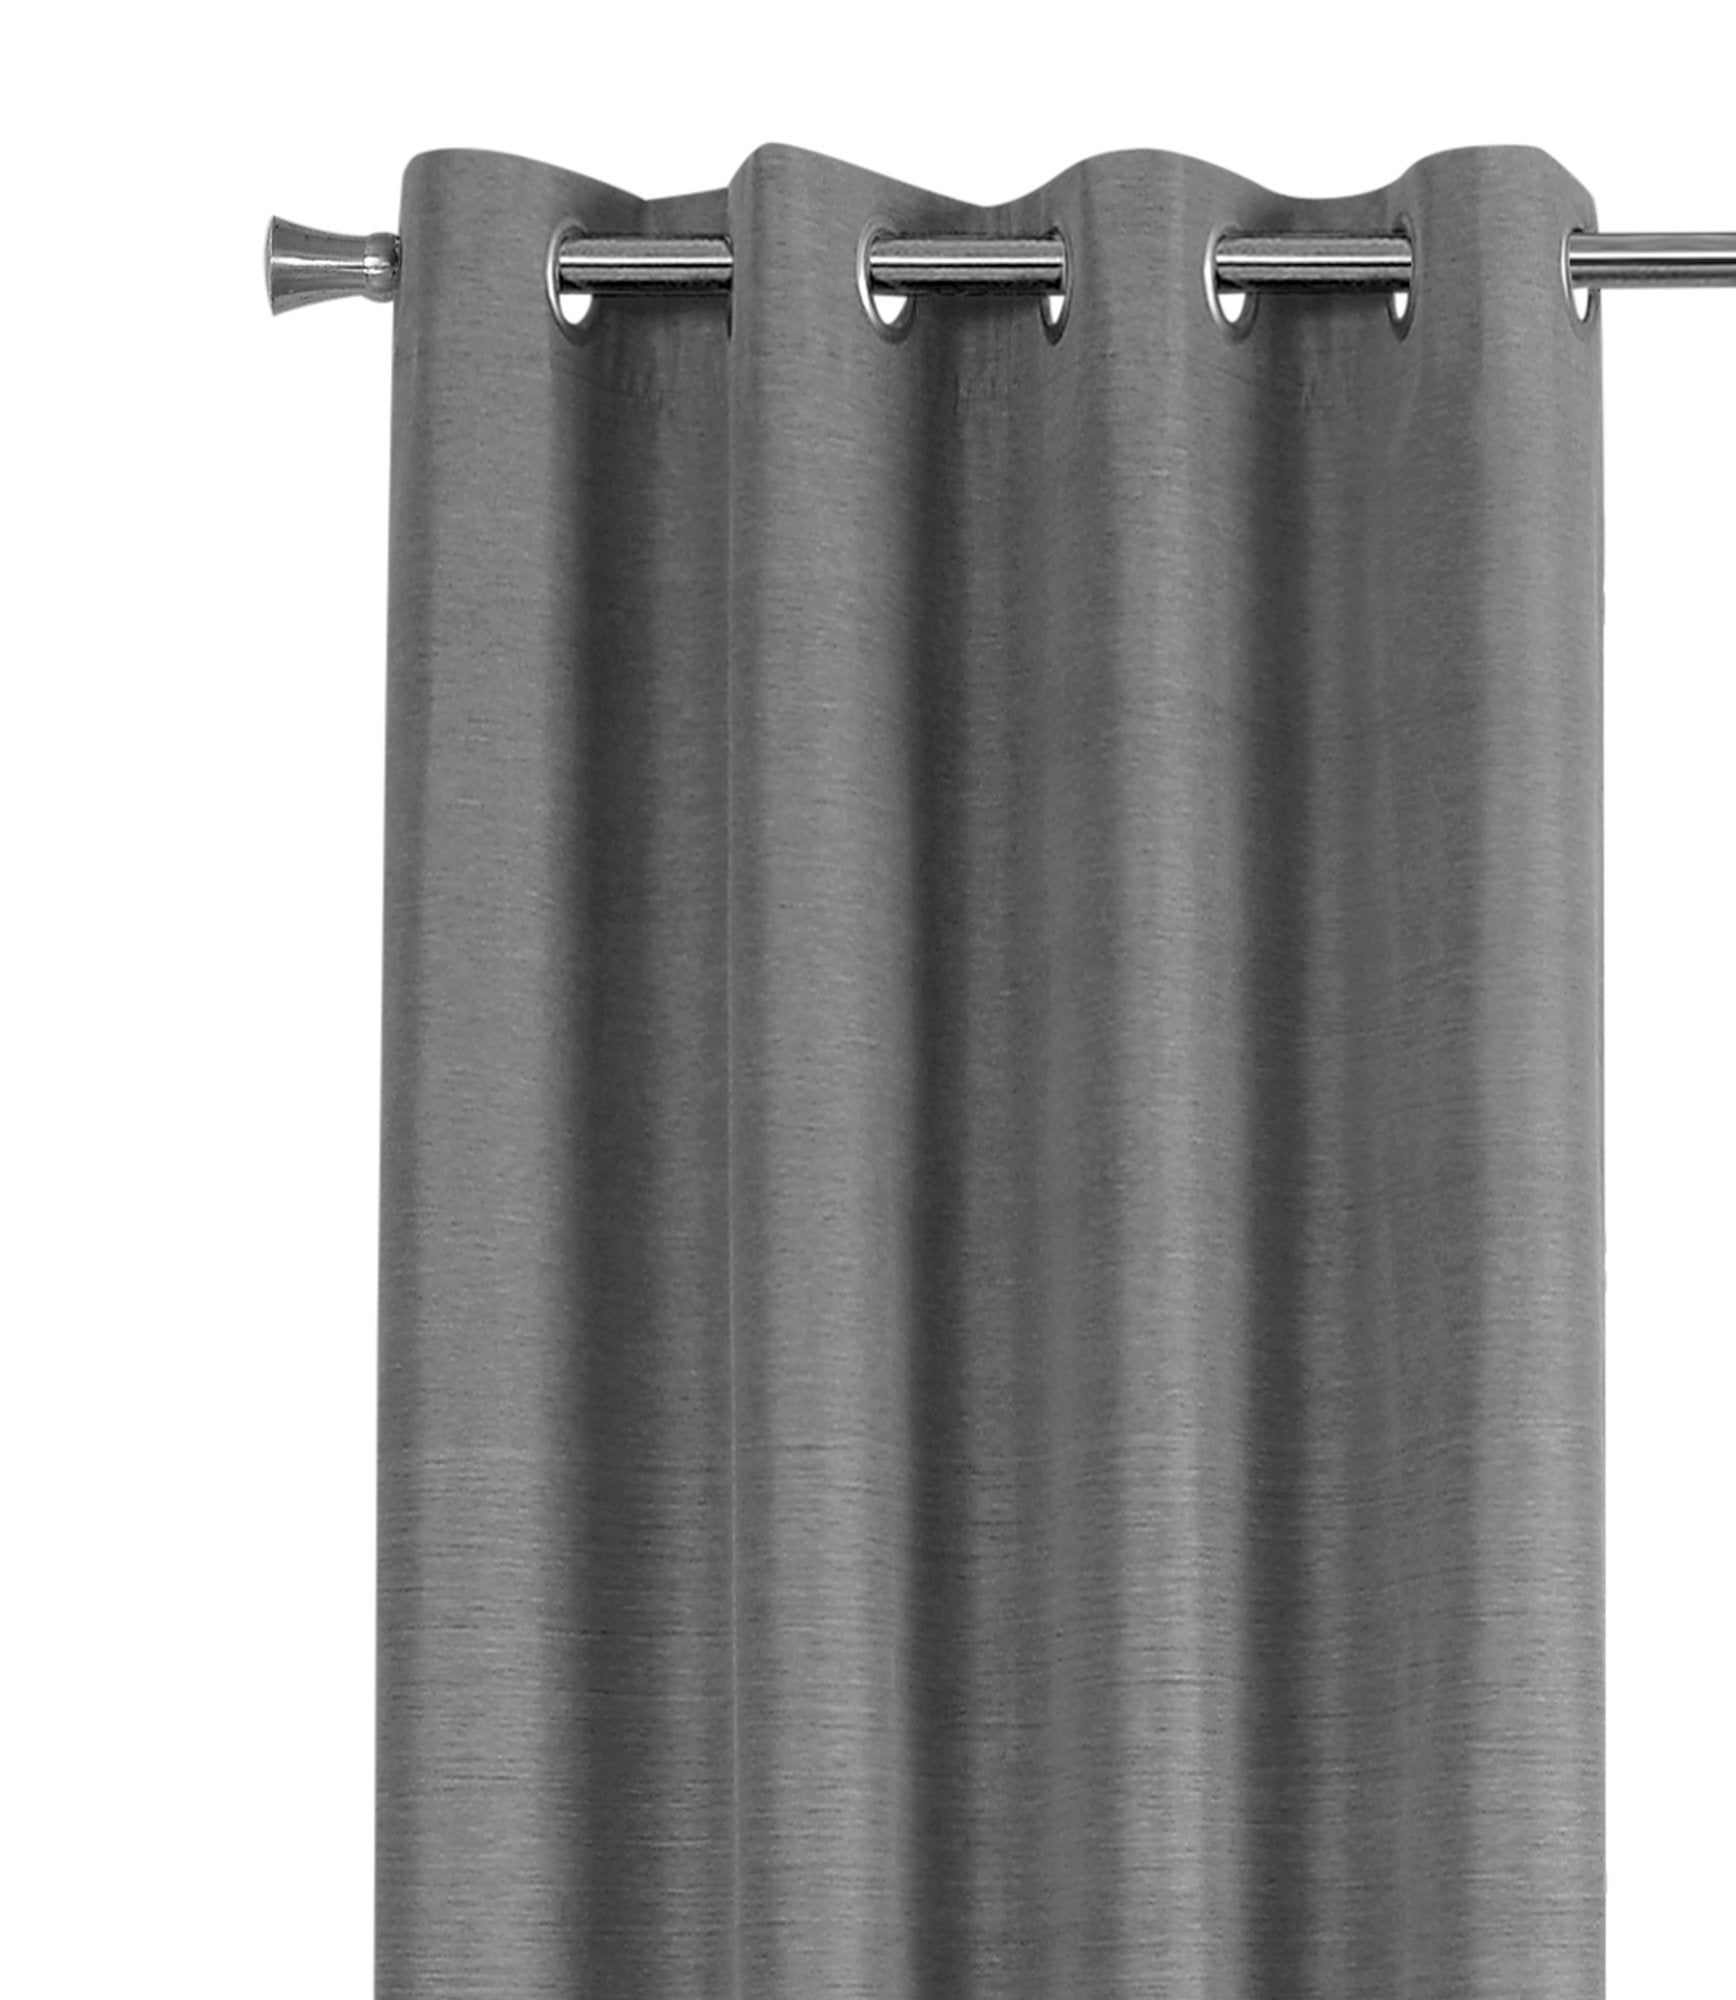 MN-849841    Curtain Panel, 2Pcs Set, 54"W X 84"L, 100% Blackout, Grommet, Living Room, Bedroom, Kitchen, Thermal Insulation Fabric, Polyester Full Light Blocking Fabric, Grey, Contemporary, Modern